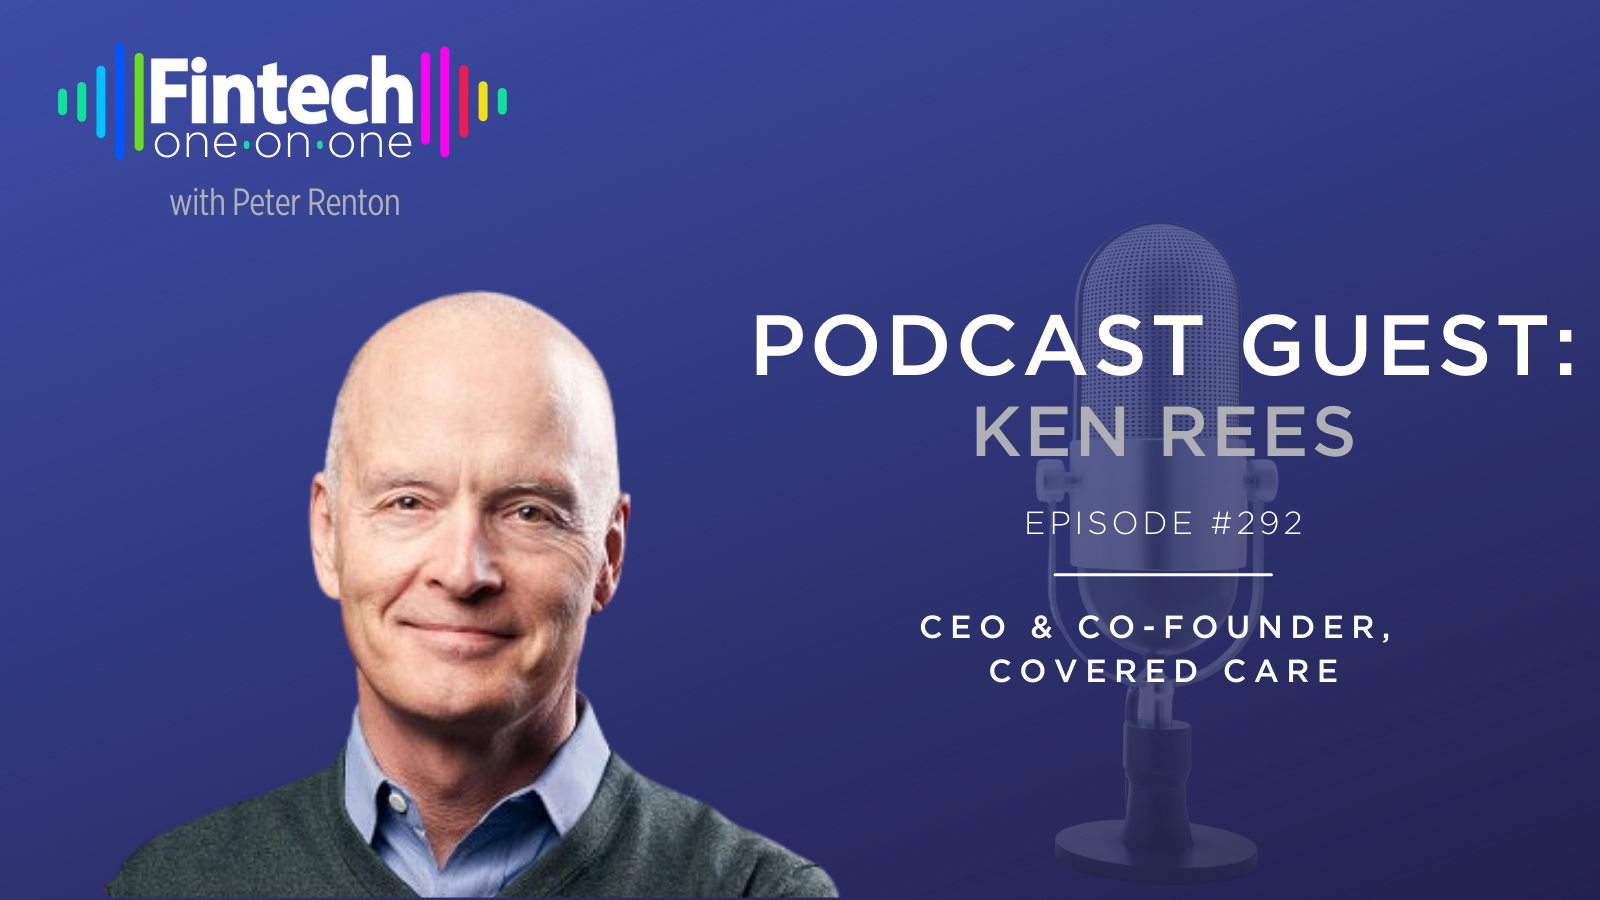 Ken Rees, Co-Founder & CEO of Covered Care